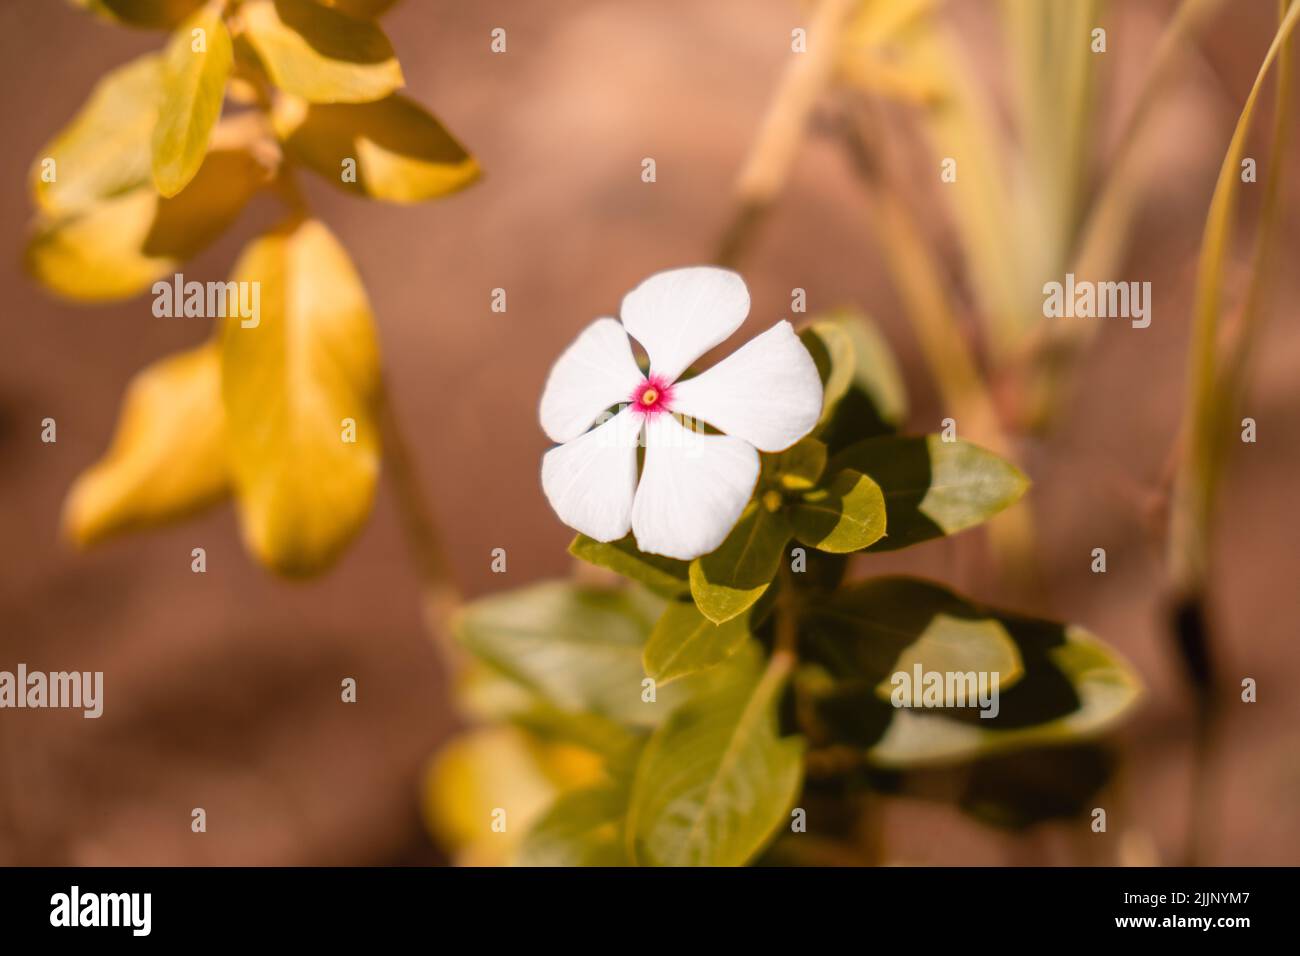 The Catharanthus roseus a white star flower with red center Stock Photo